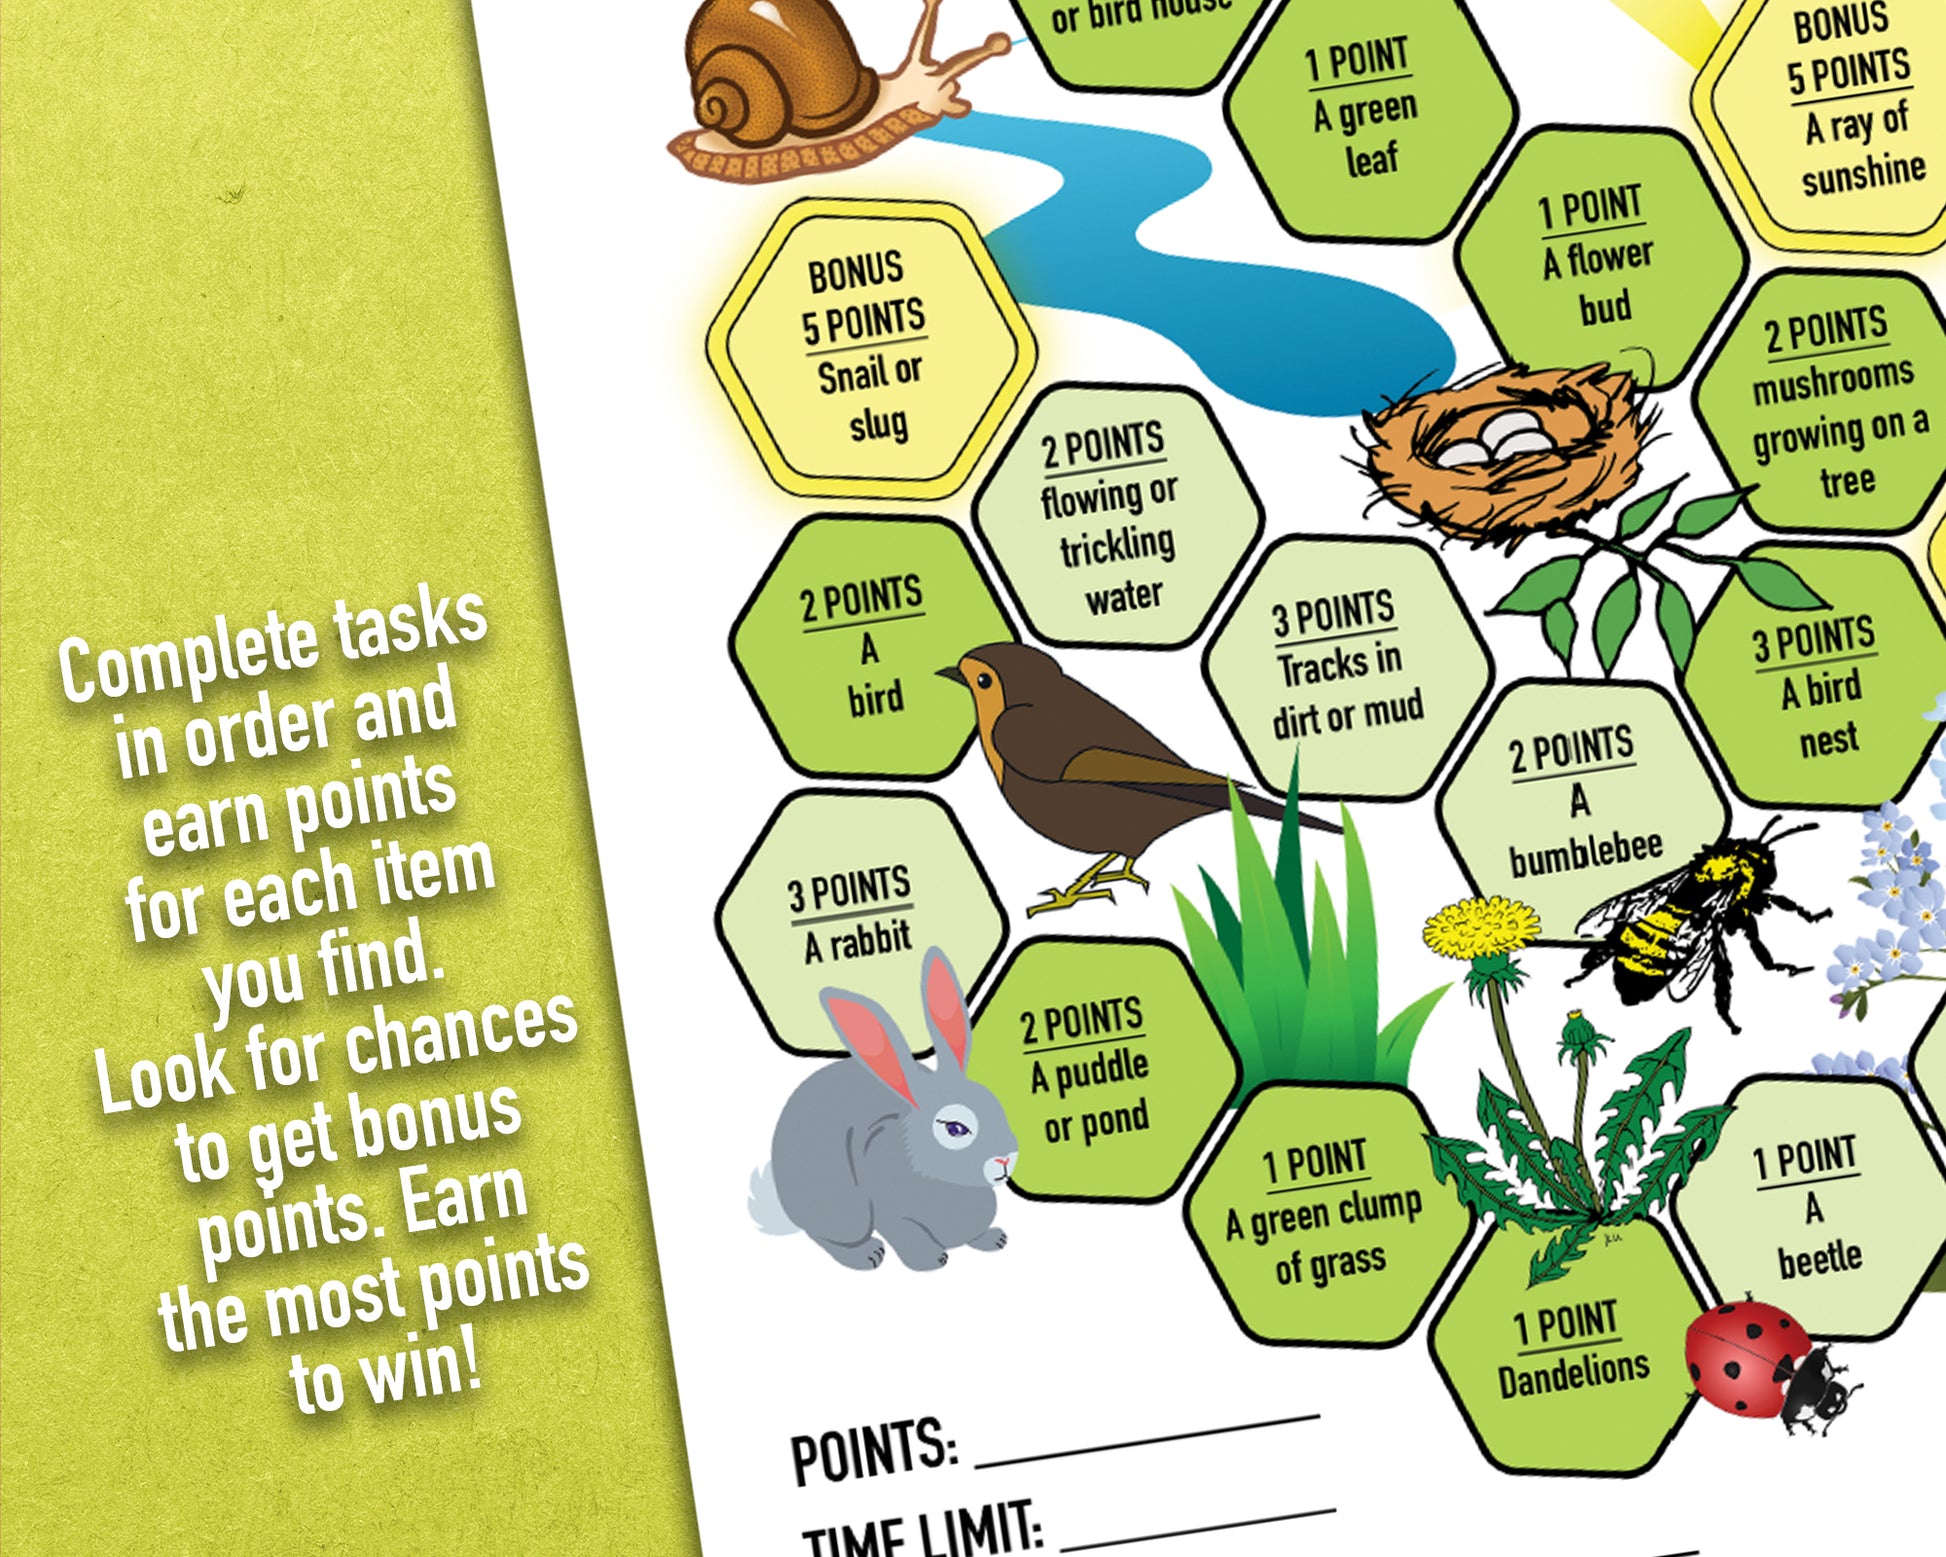 A printable nature trek outdoor spring scavenger hunt competitive team building activity. The worksheet looks like a game board where each spot on the board has an item you need to find to earn points and advance along the path.